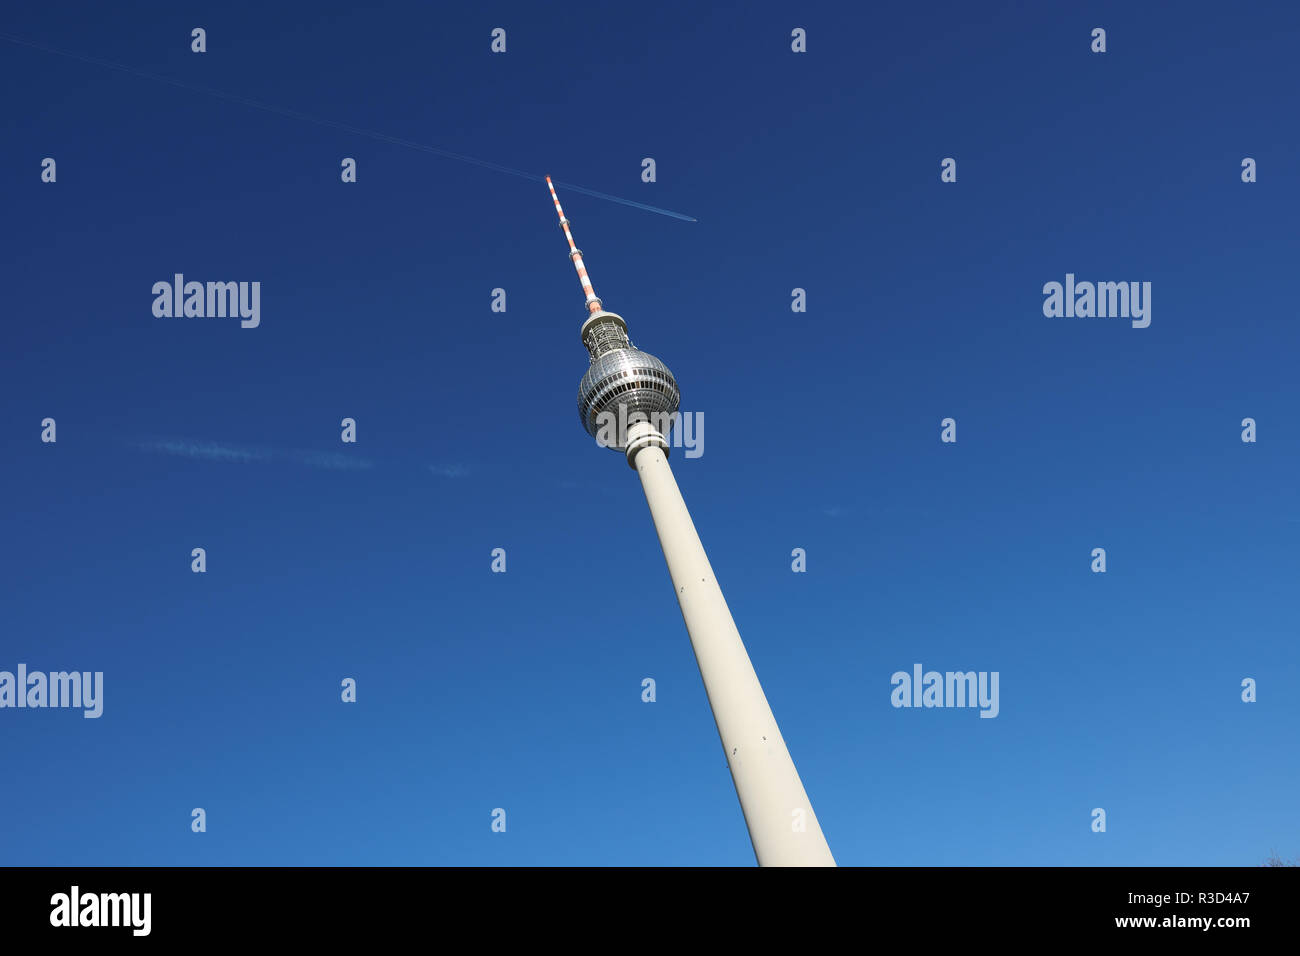 Berlin Germany -The Berliner Fernsehturm Television Tower dominates the East Berlin sky Stock Photo